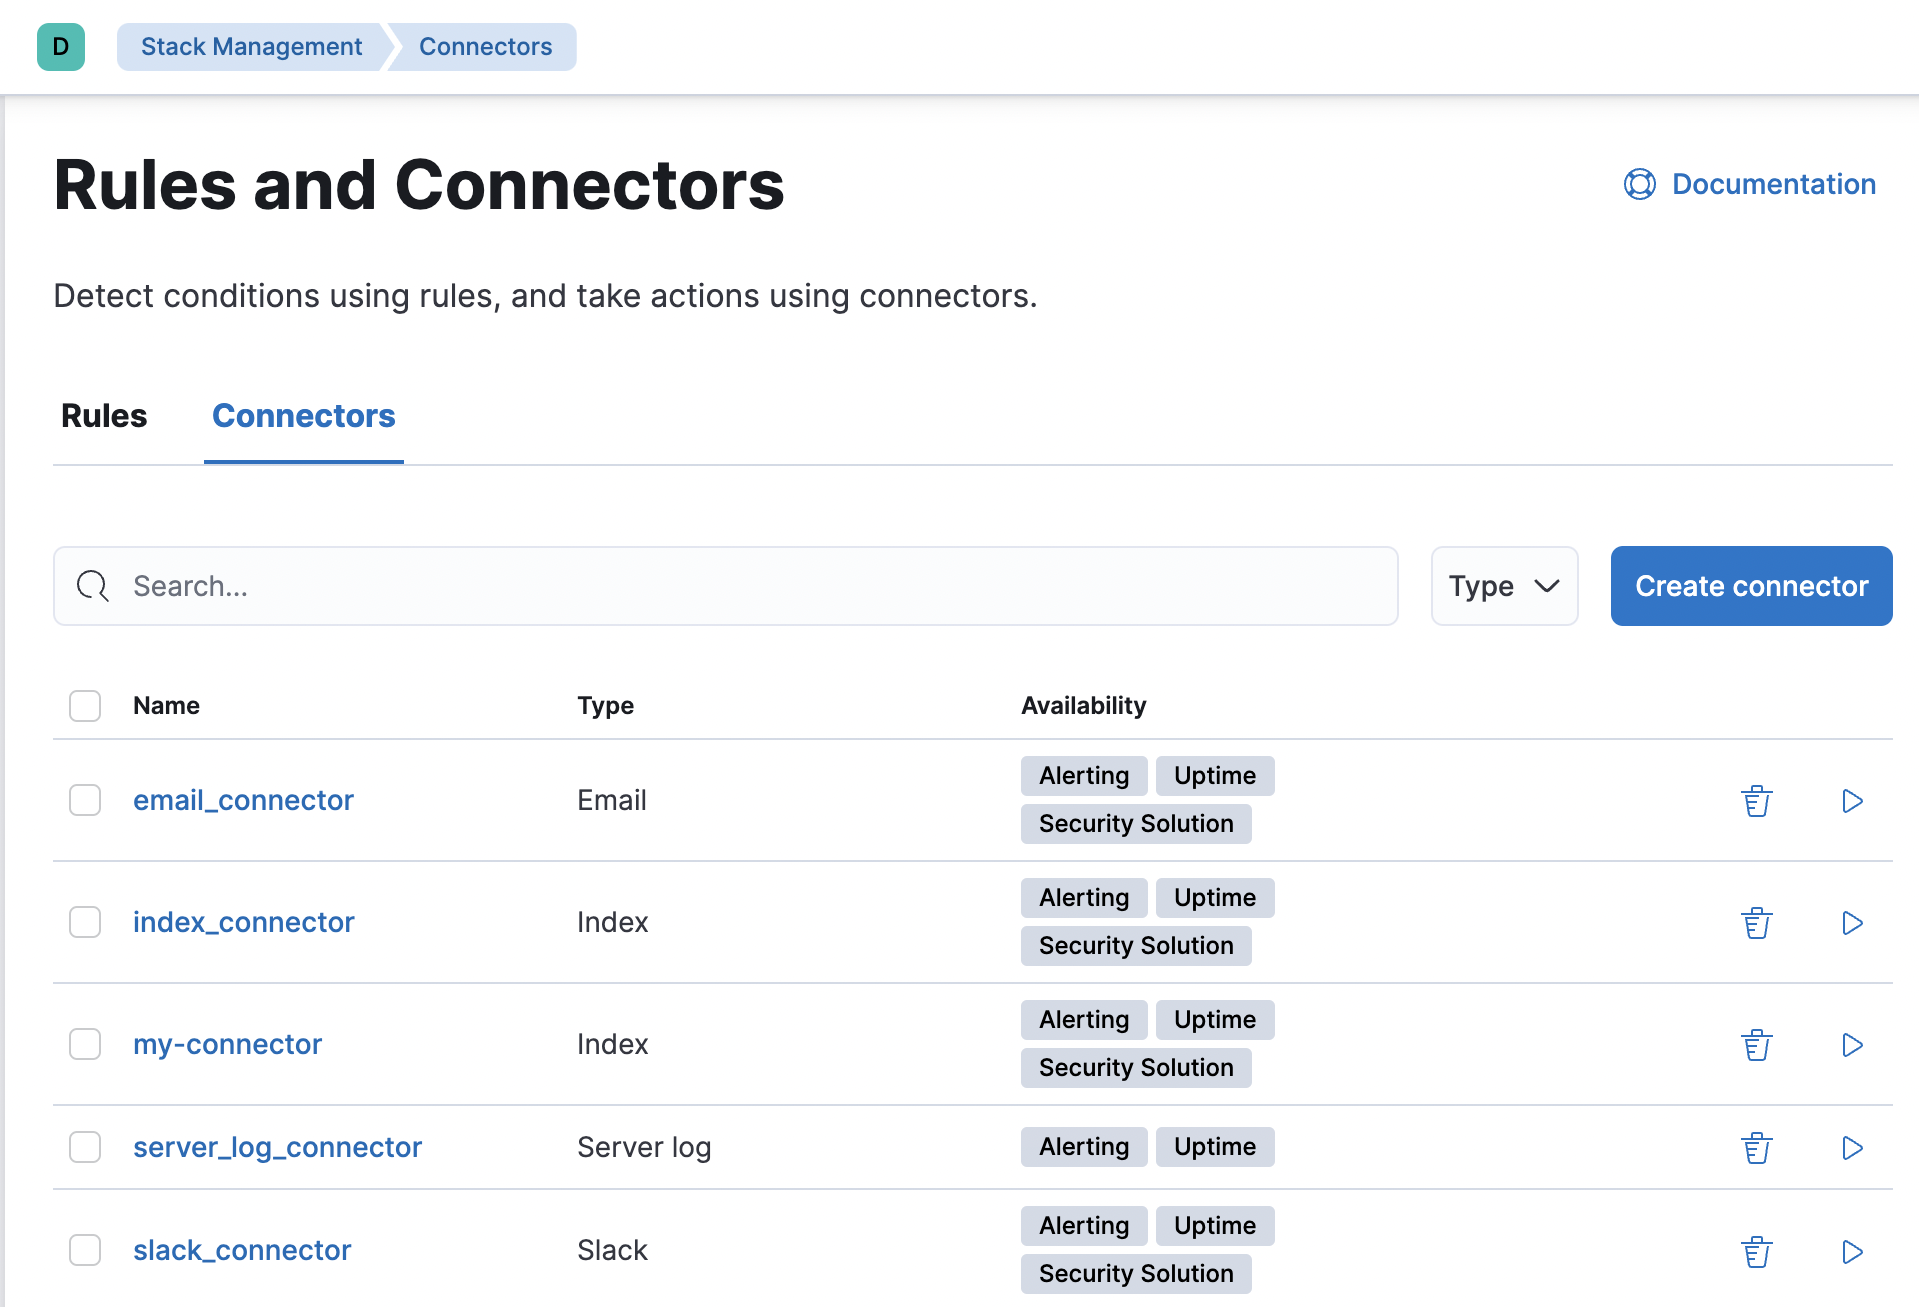 Example connector listing in the Rules and Connectors UI